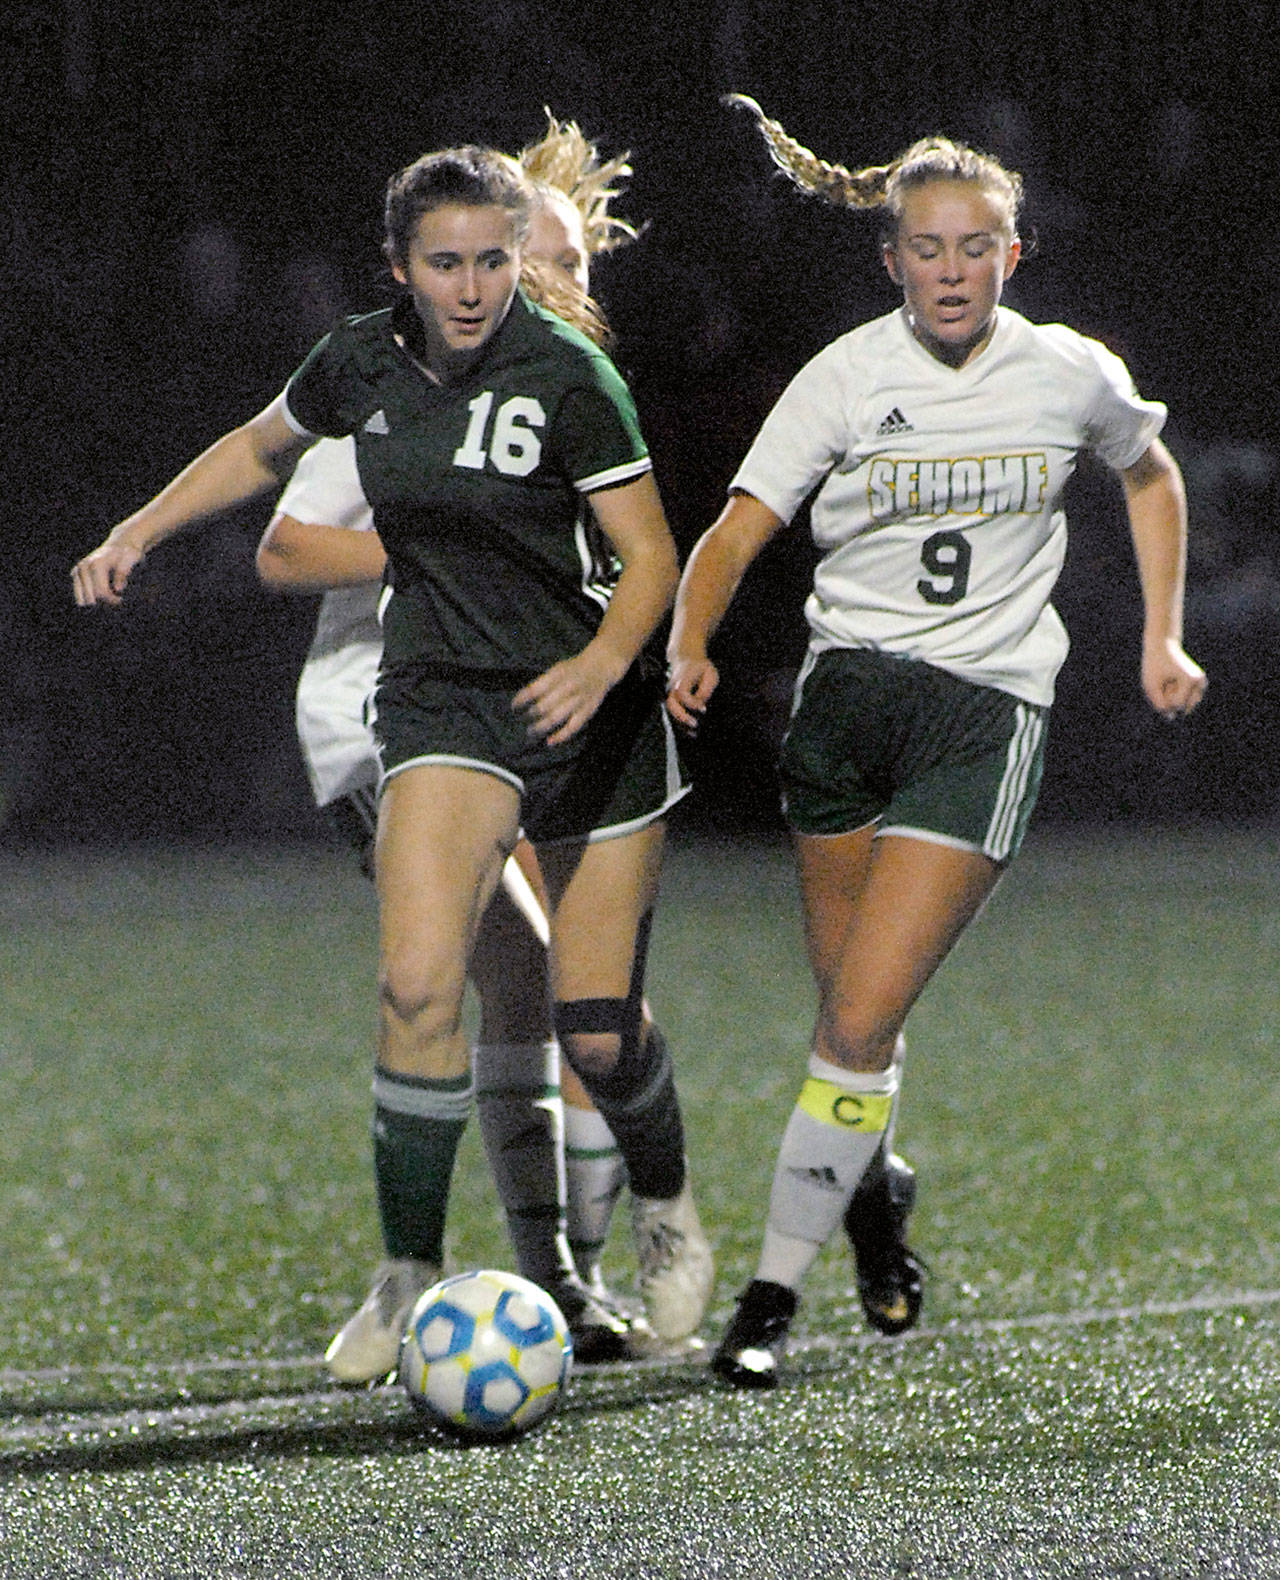 Port Angeles’ Delaney Wenzel outruns Sehome’s Lillian Gruman during Tuesday night’s first-round playoff match at Wally Sigmar Field at Peninsula College in Port Angeles. (Keith Thorpe/Peninsula Daily News)